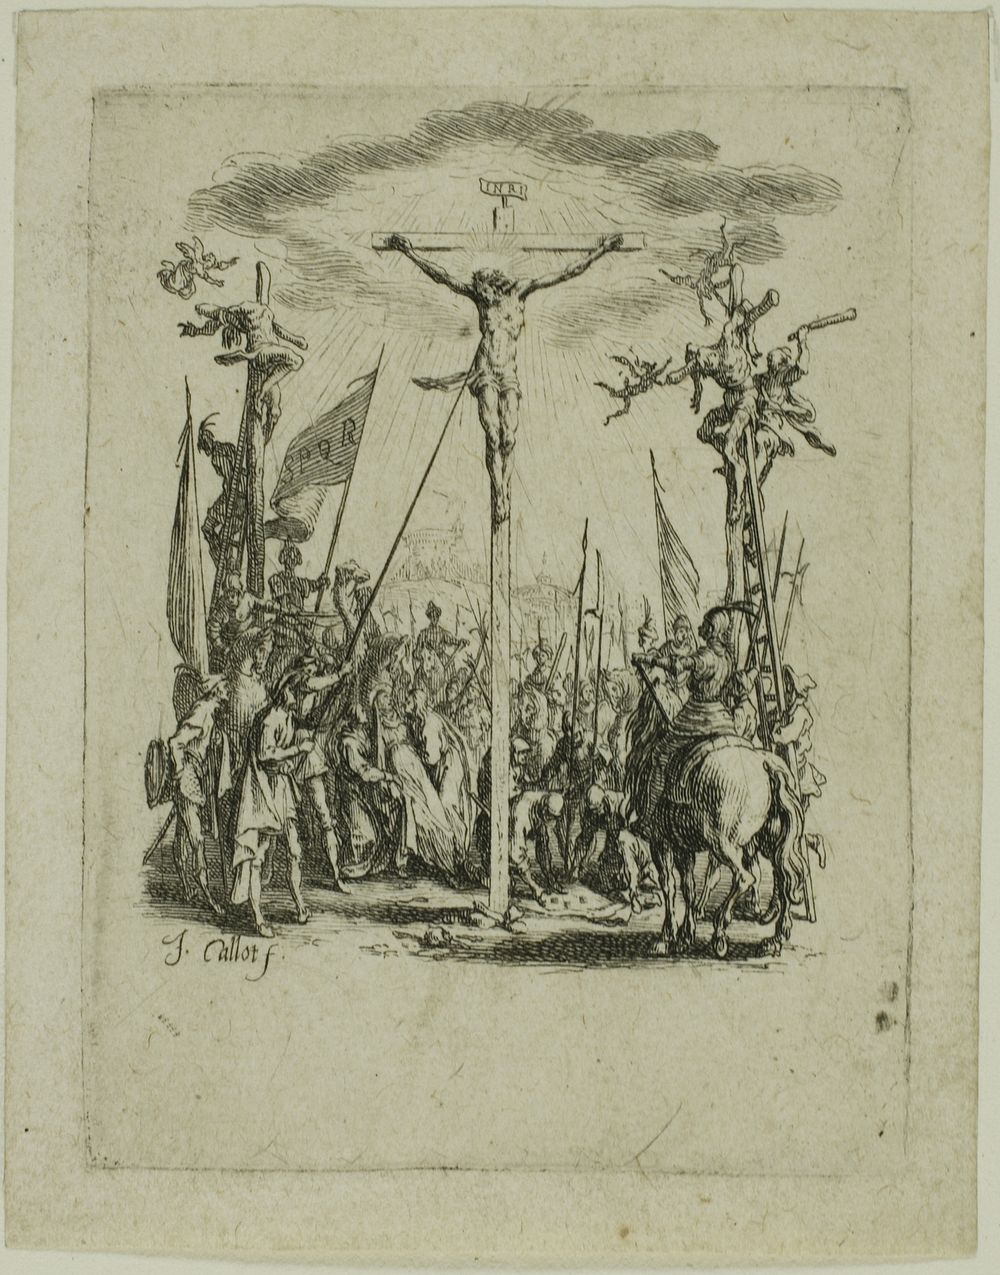 Jesus is Pierced with a Lance, from The Small Passion by Jacques Callot